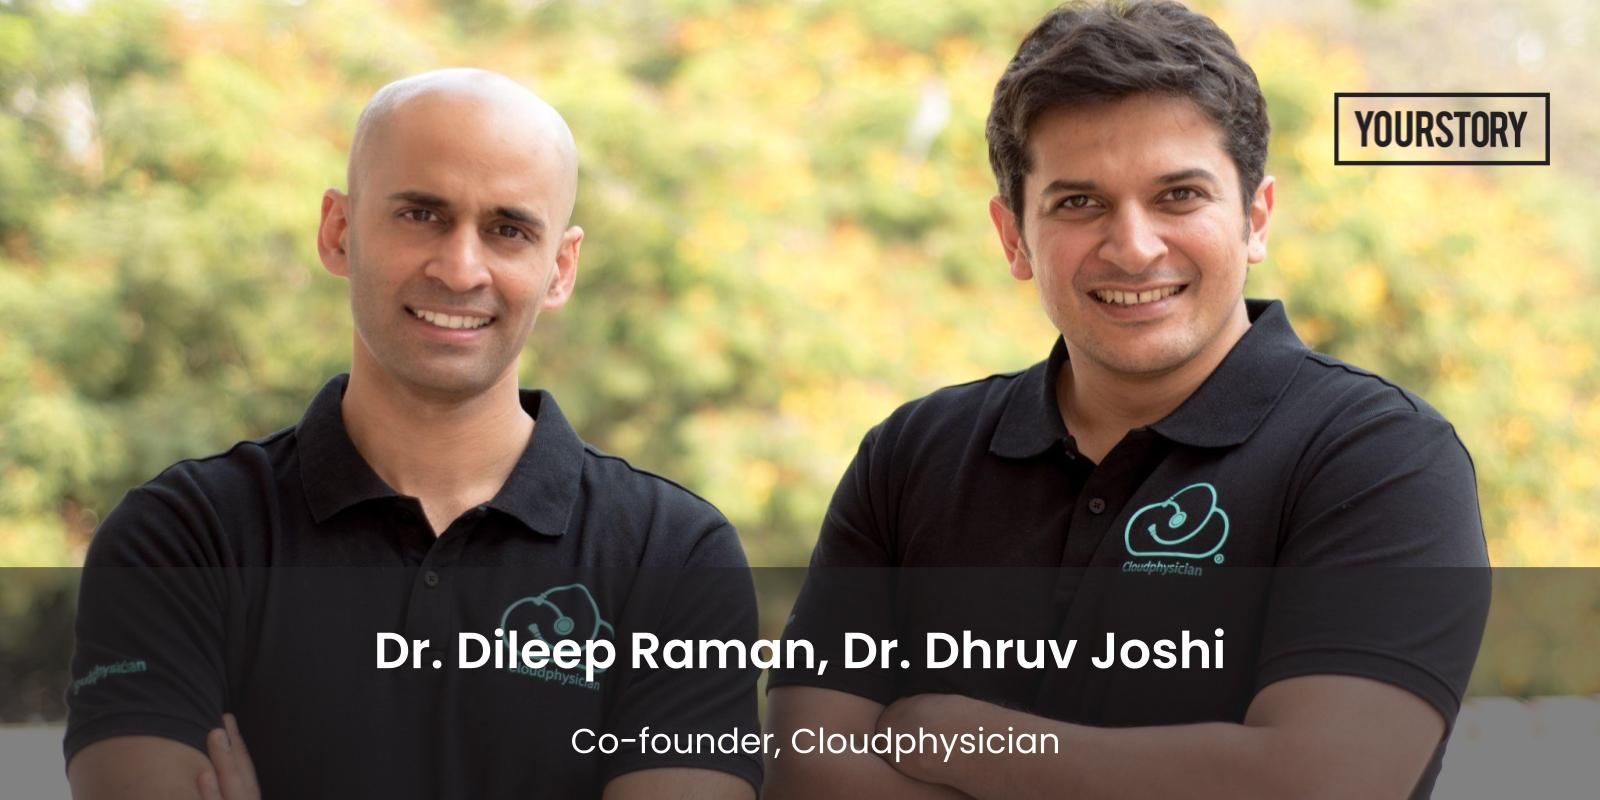 [Funding alert] ICU solution provider Cloudphysician raises $4M in pre-Series A round from Elevar Equity